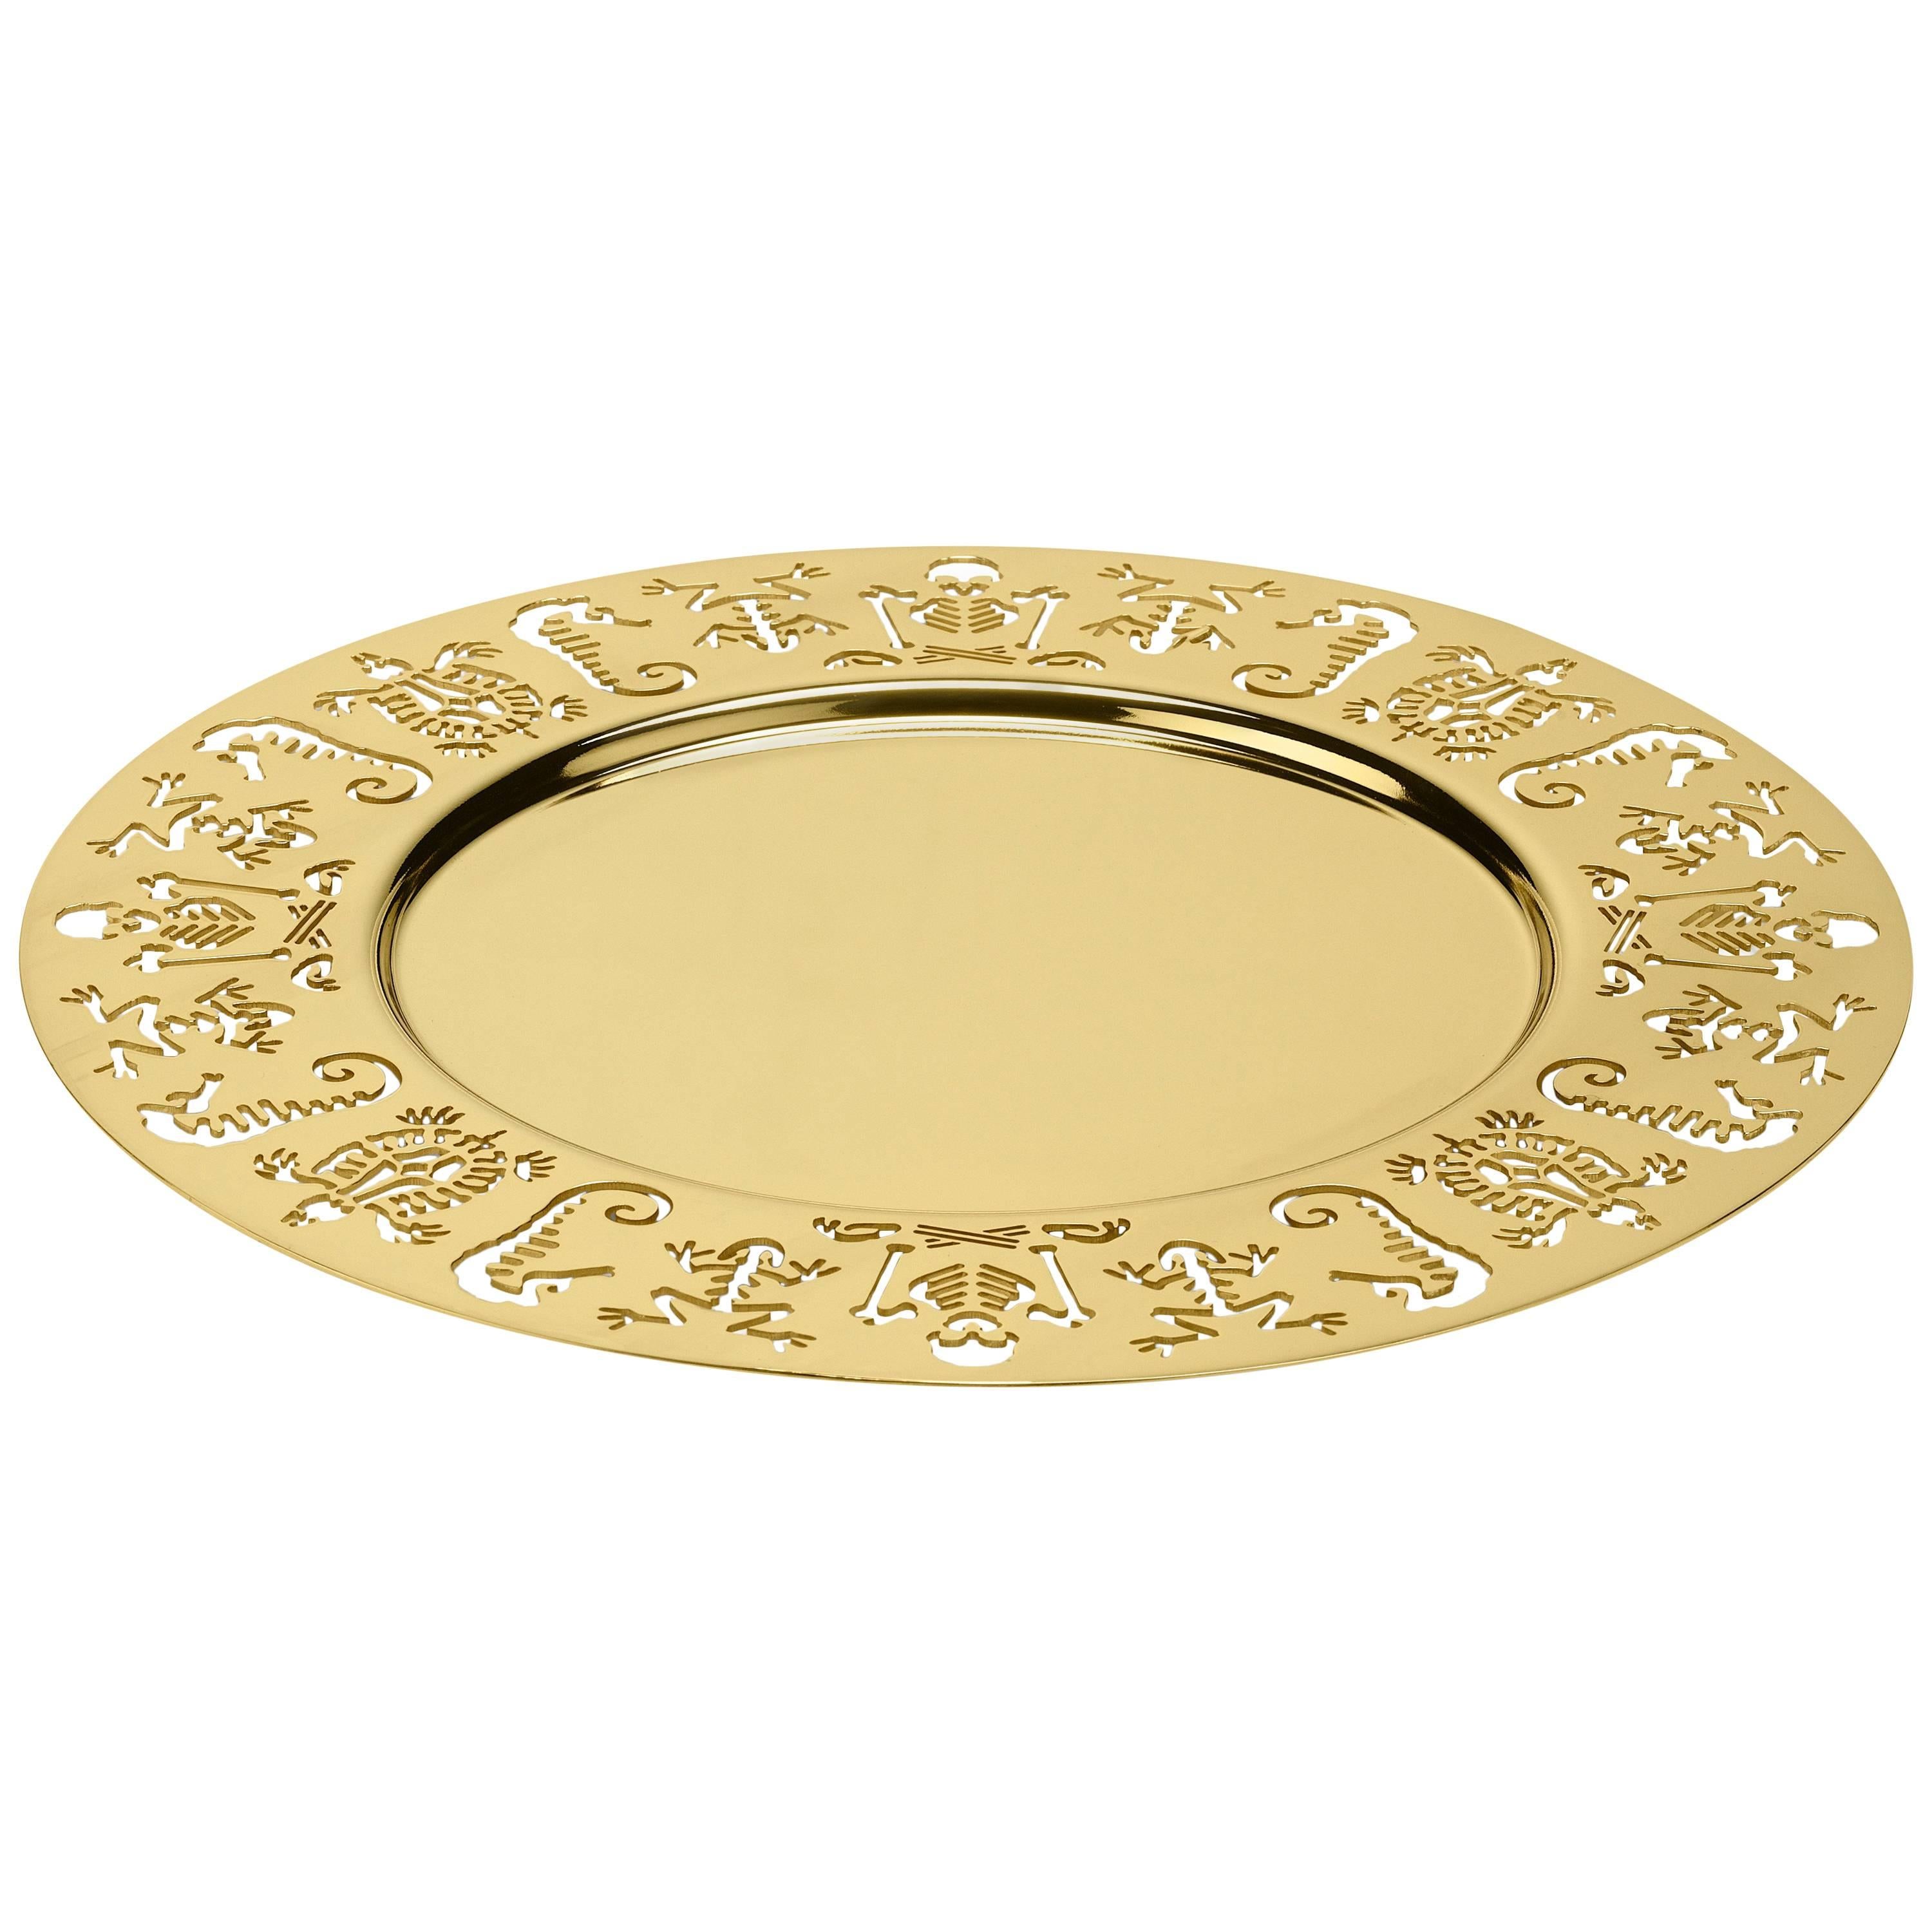 Ghidini 1961 Perished Round Tray in Polished Gold Finish For Sale